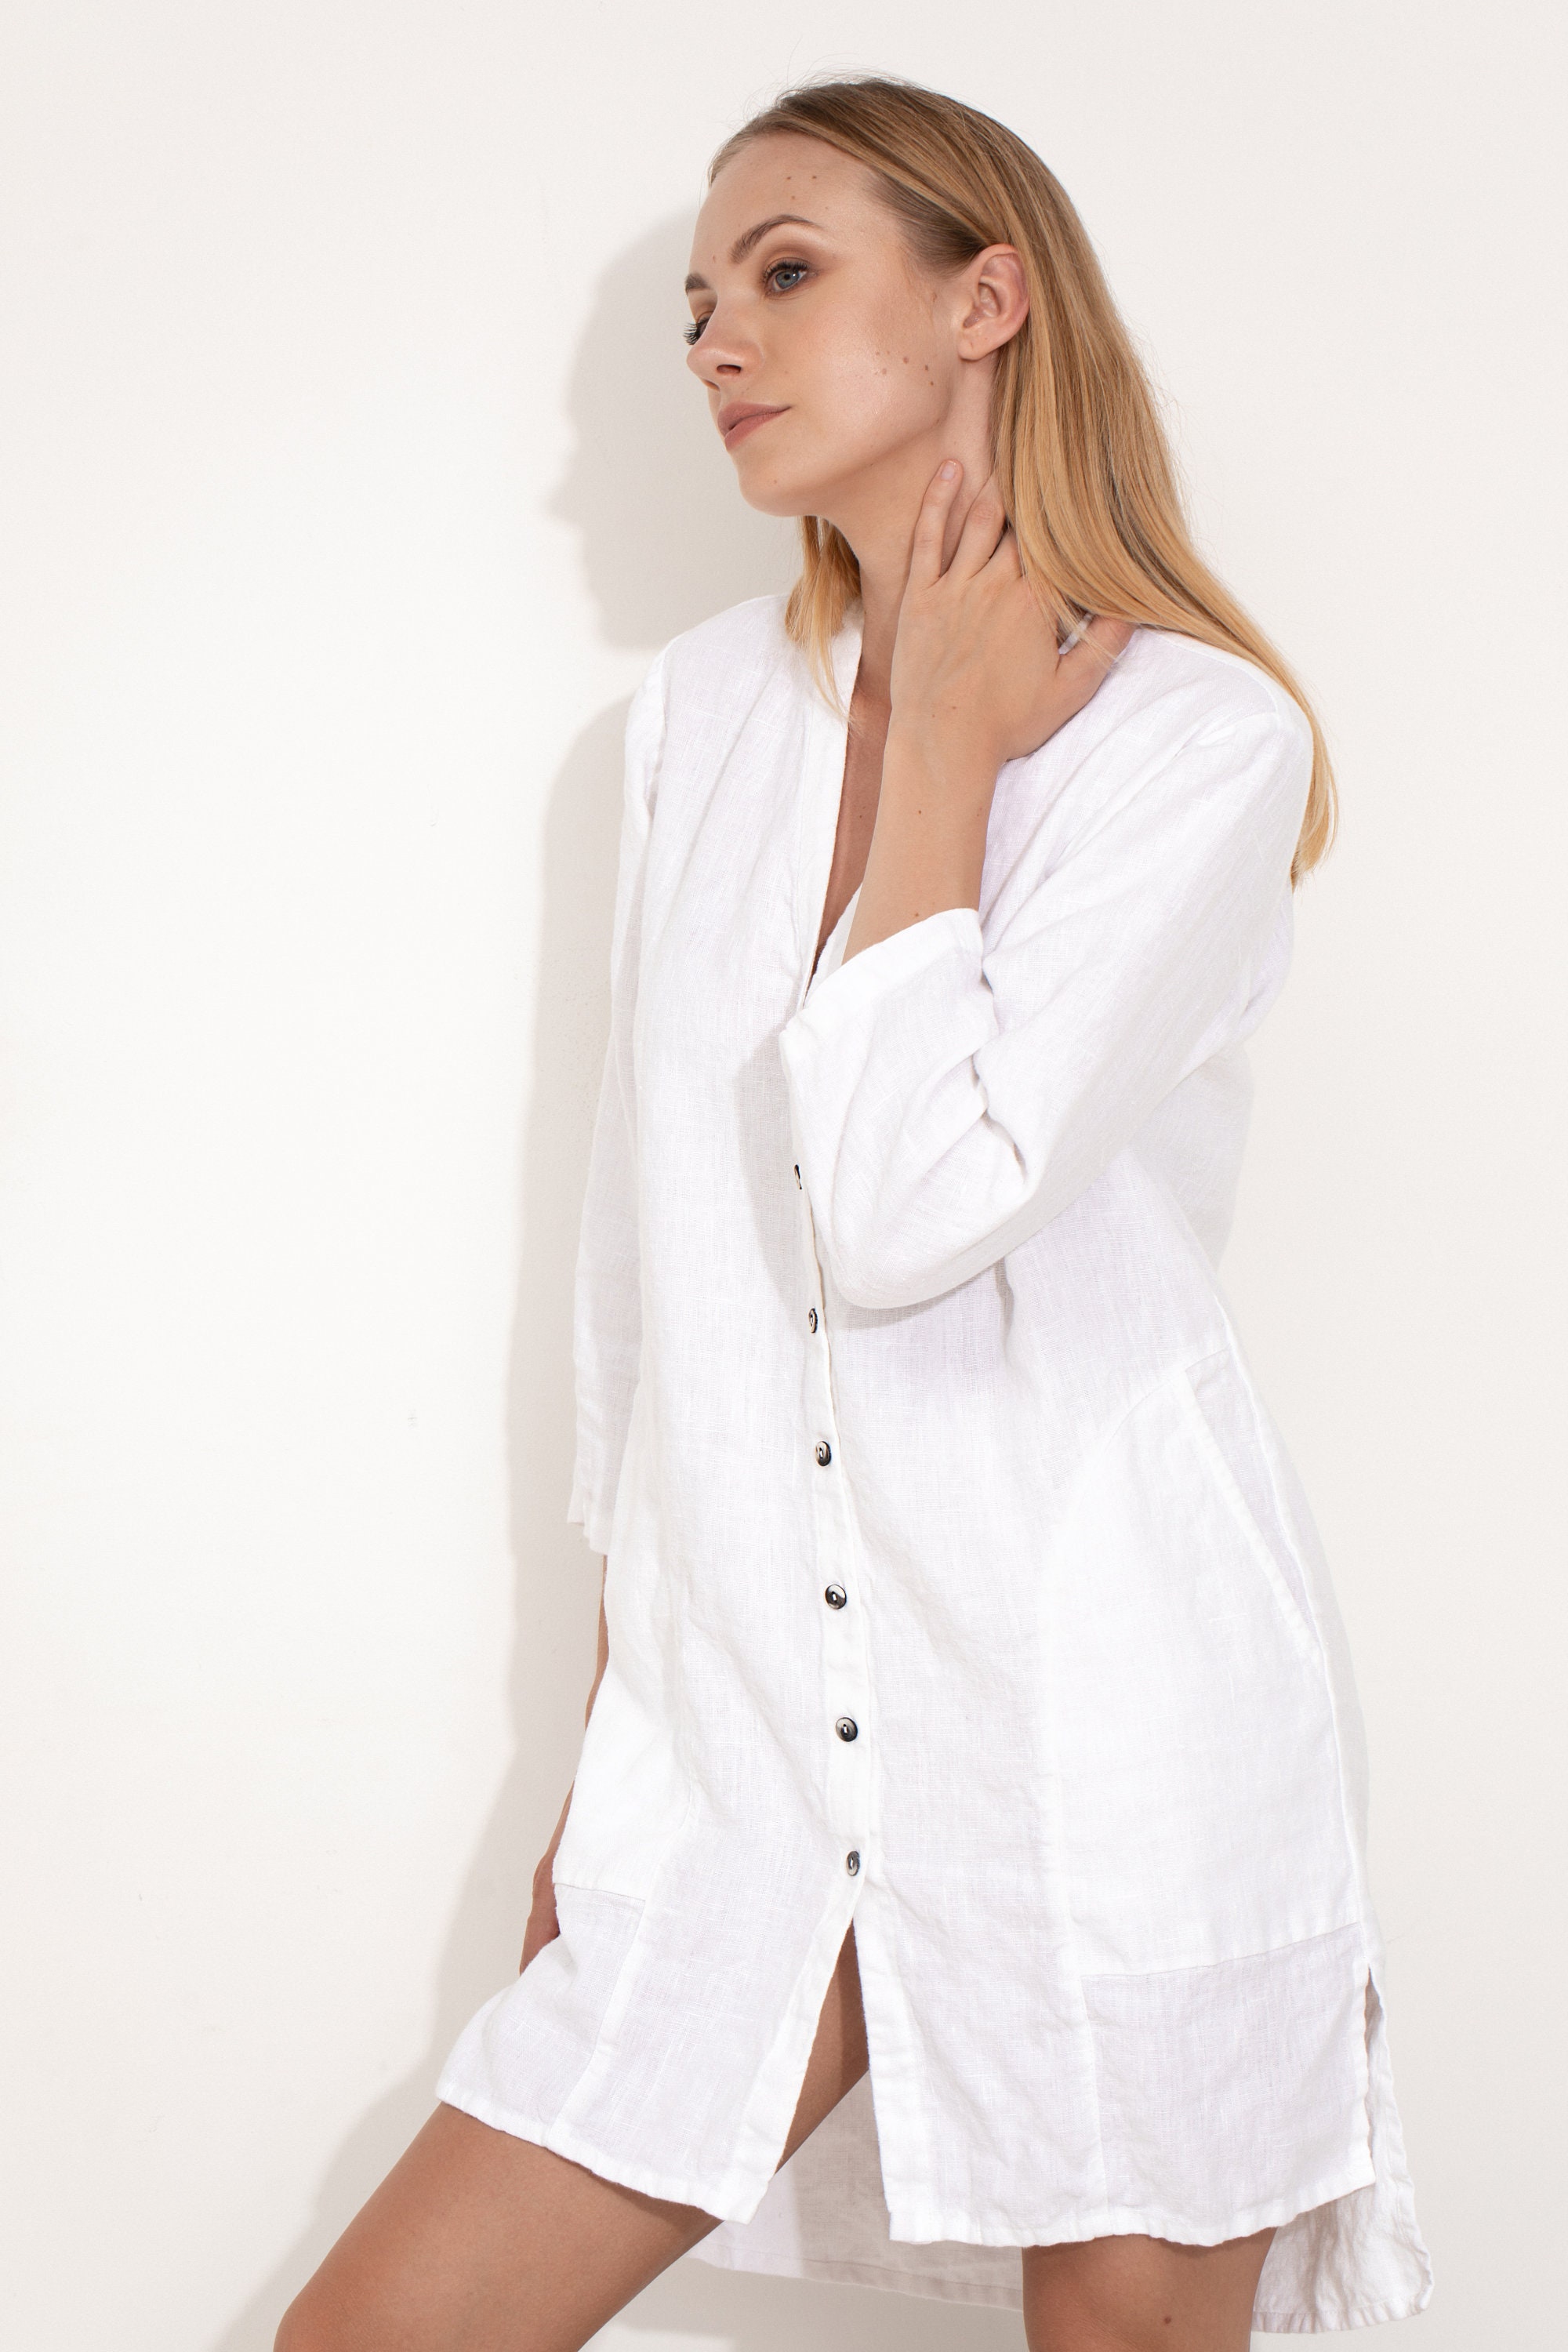 White Linen Shirt Tunic / Shift Dress / Tunic With Pockets and - Etsy